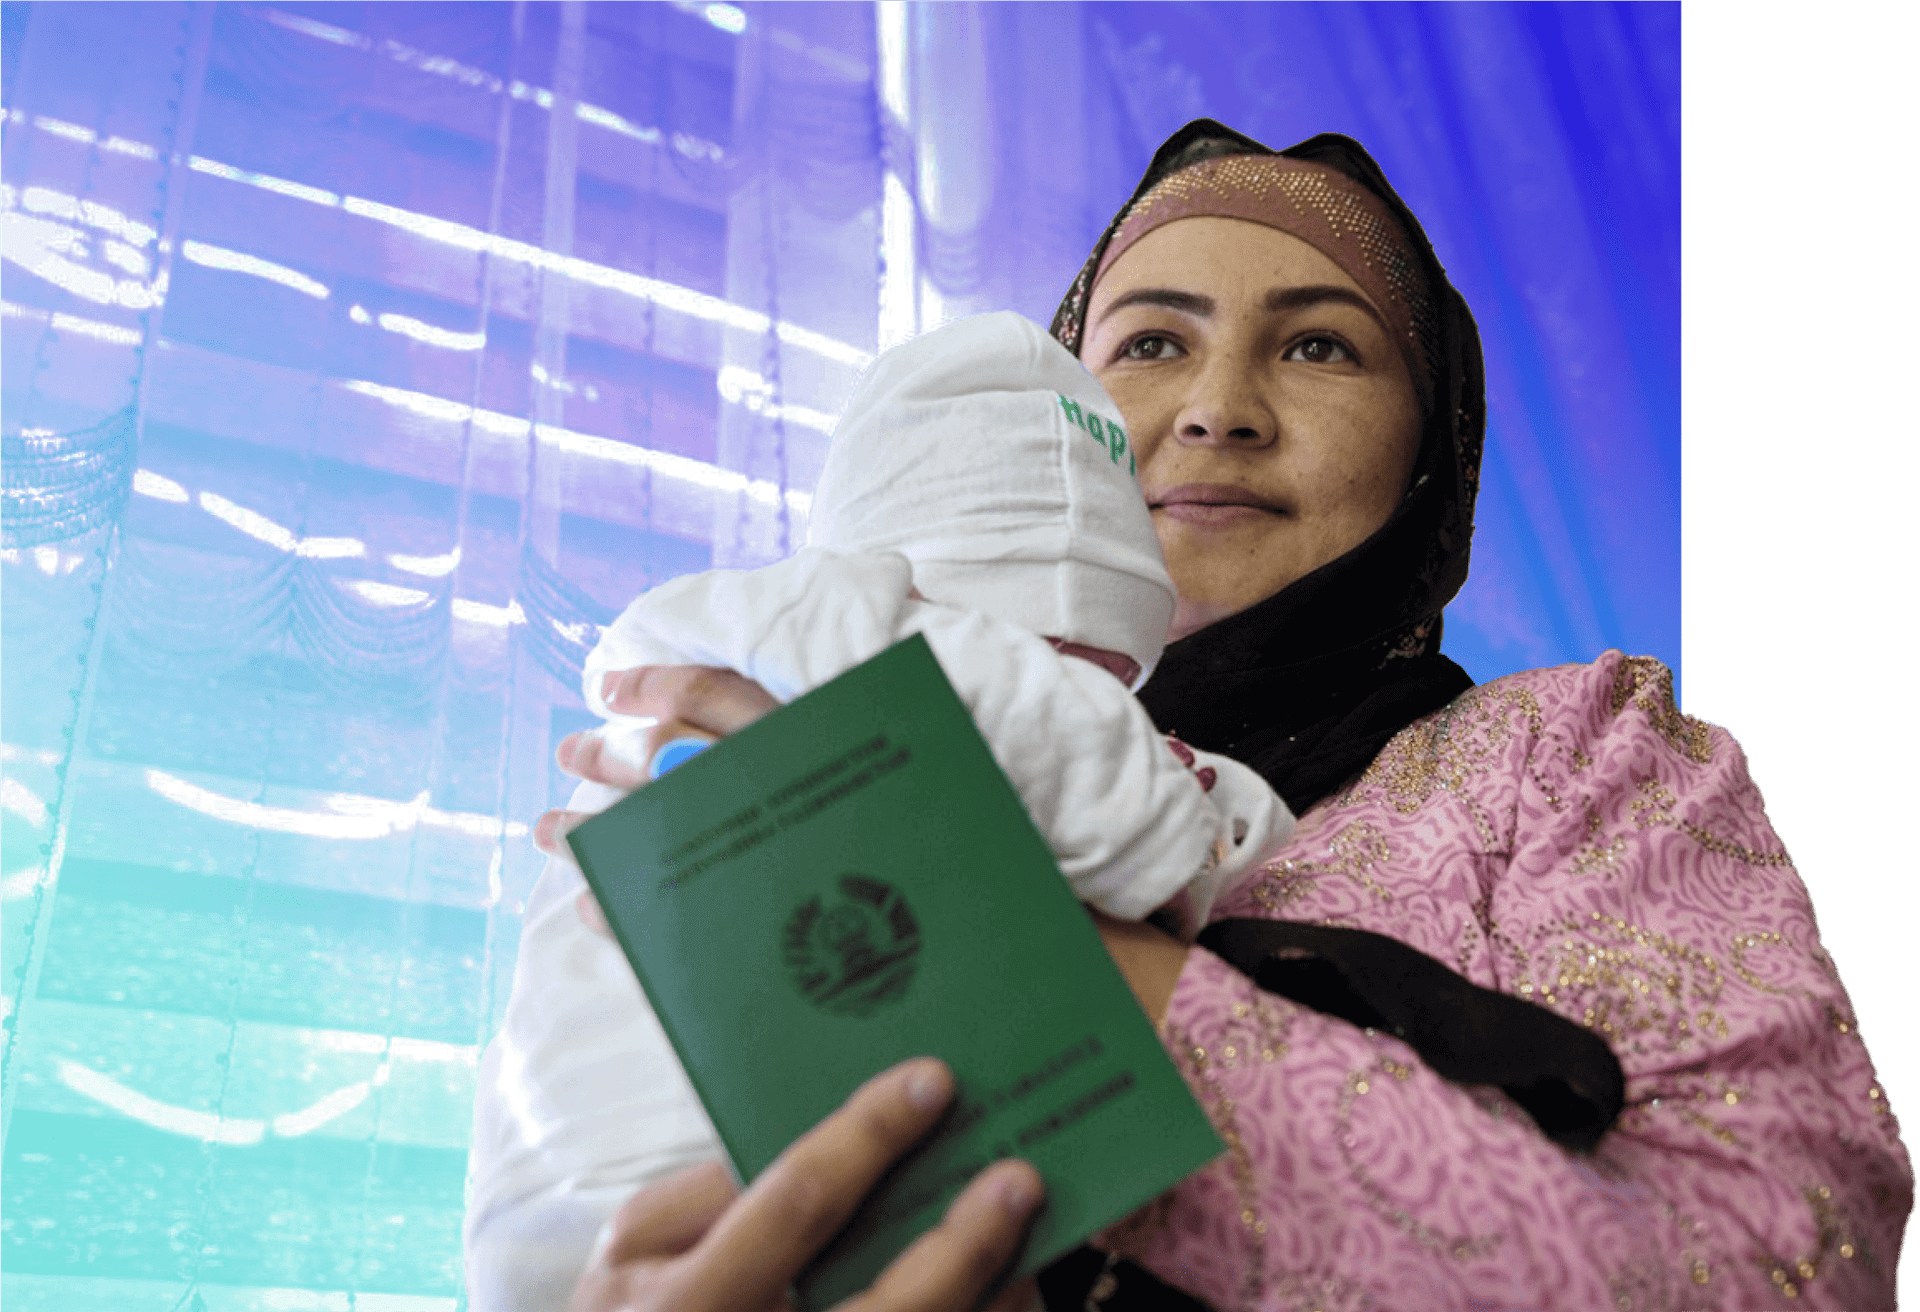 woman with headscarf holding her baby and ID